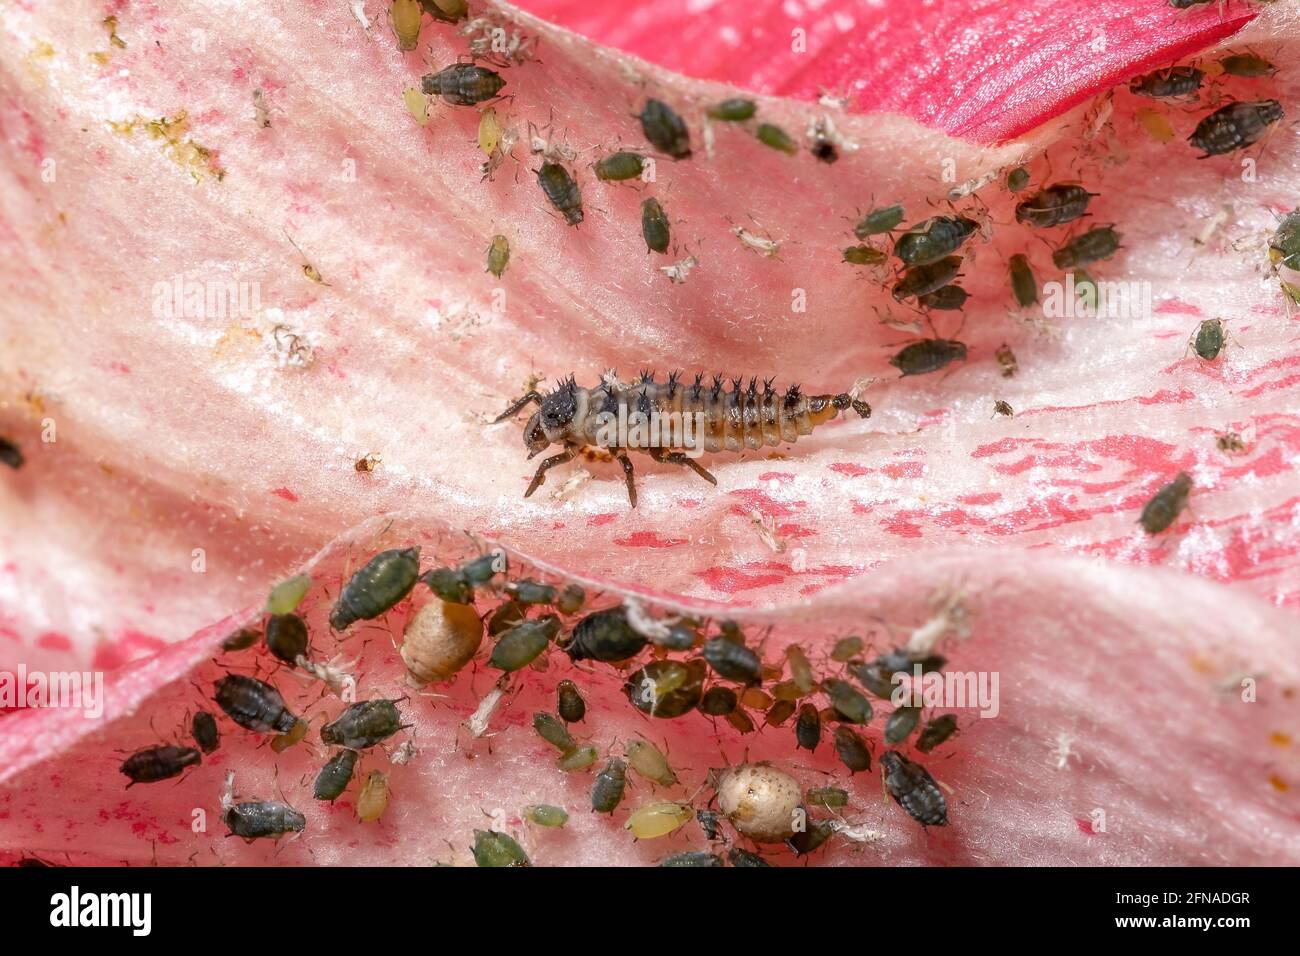 Asian Lady Beetle Larvae of the species Harmonia axyridis eating aphids on a hibiscus plant Stock Photo